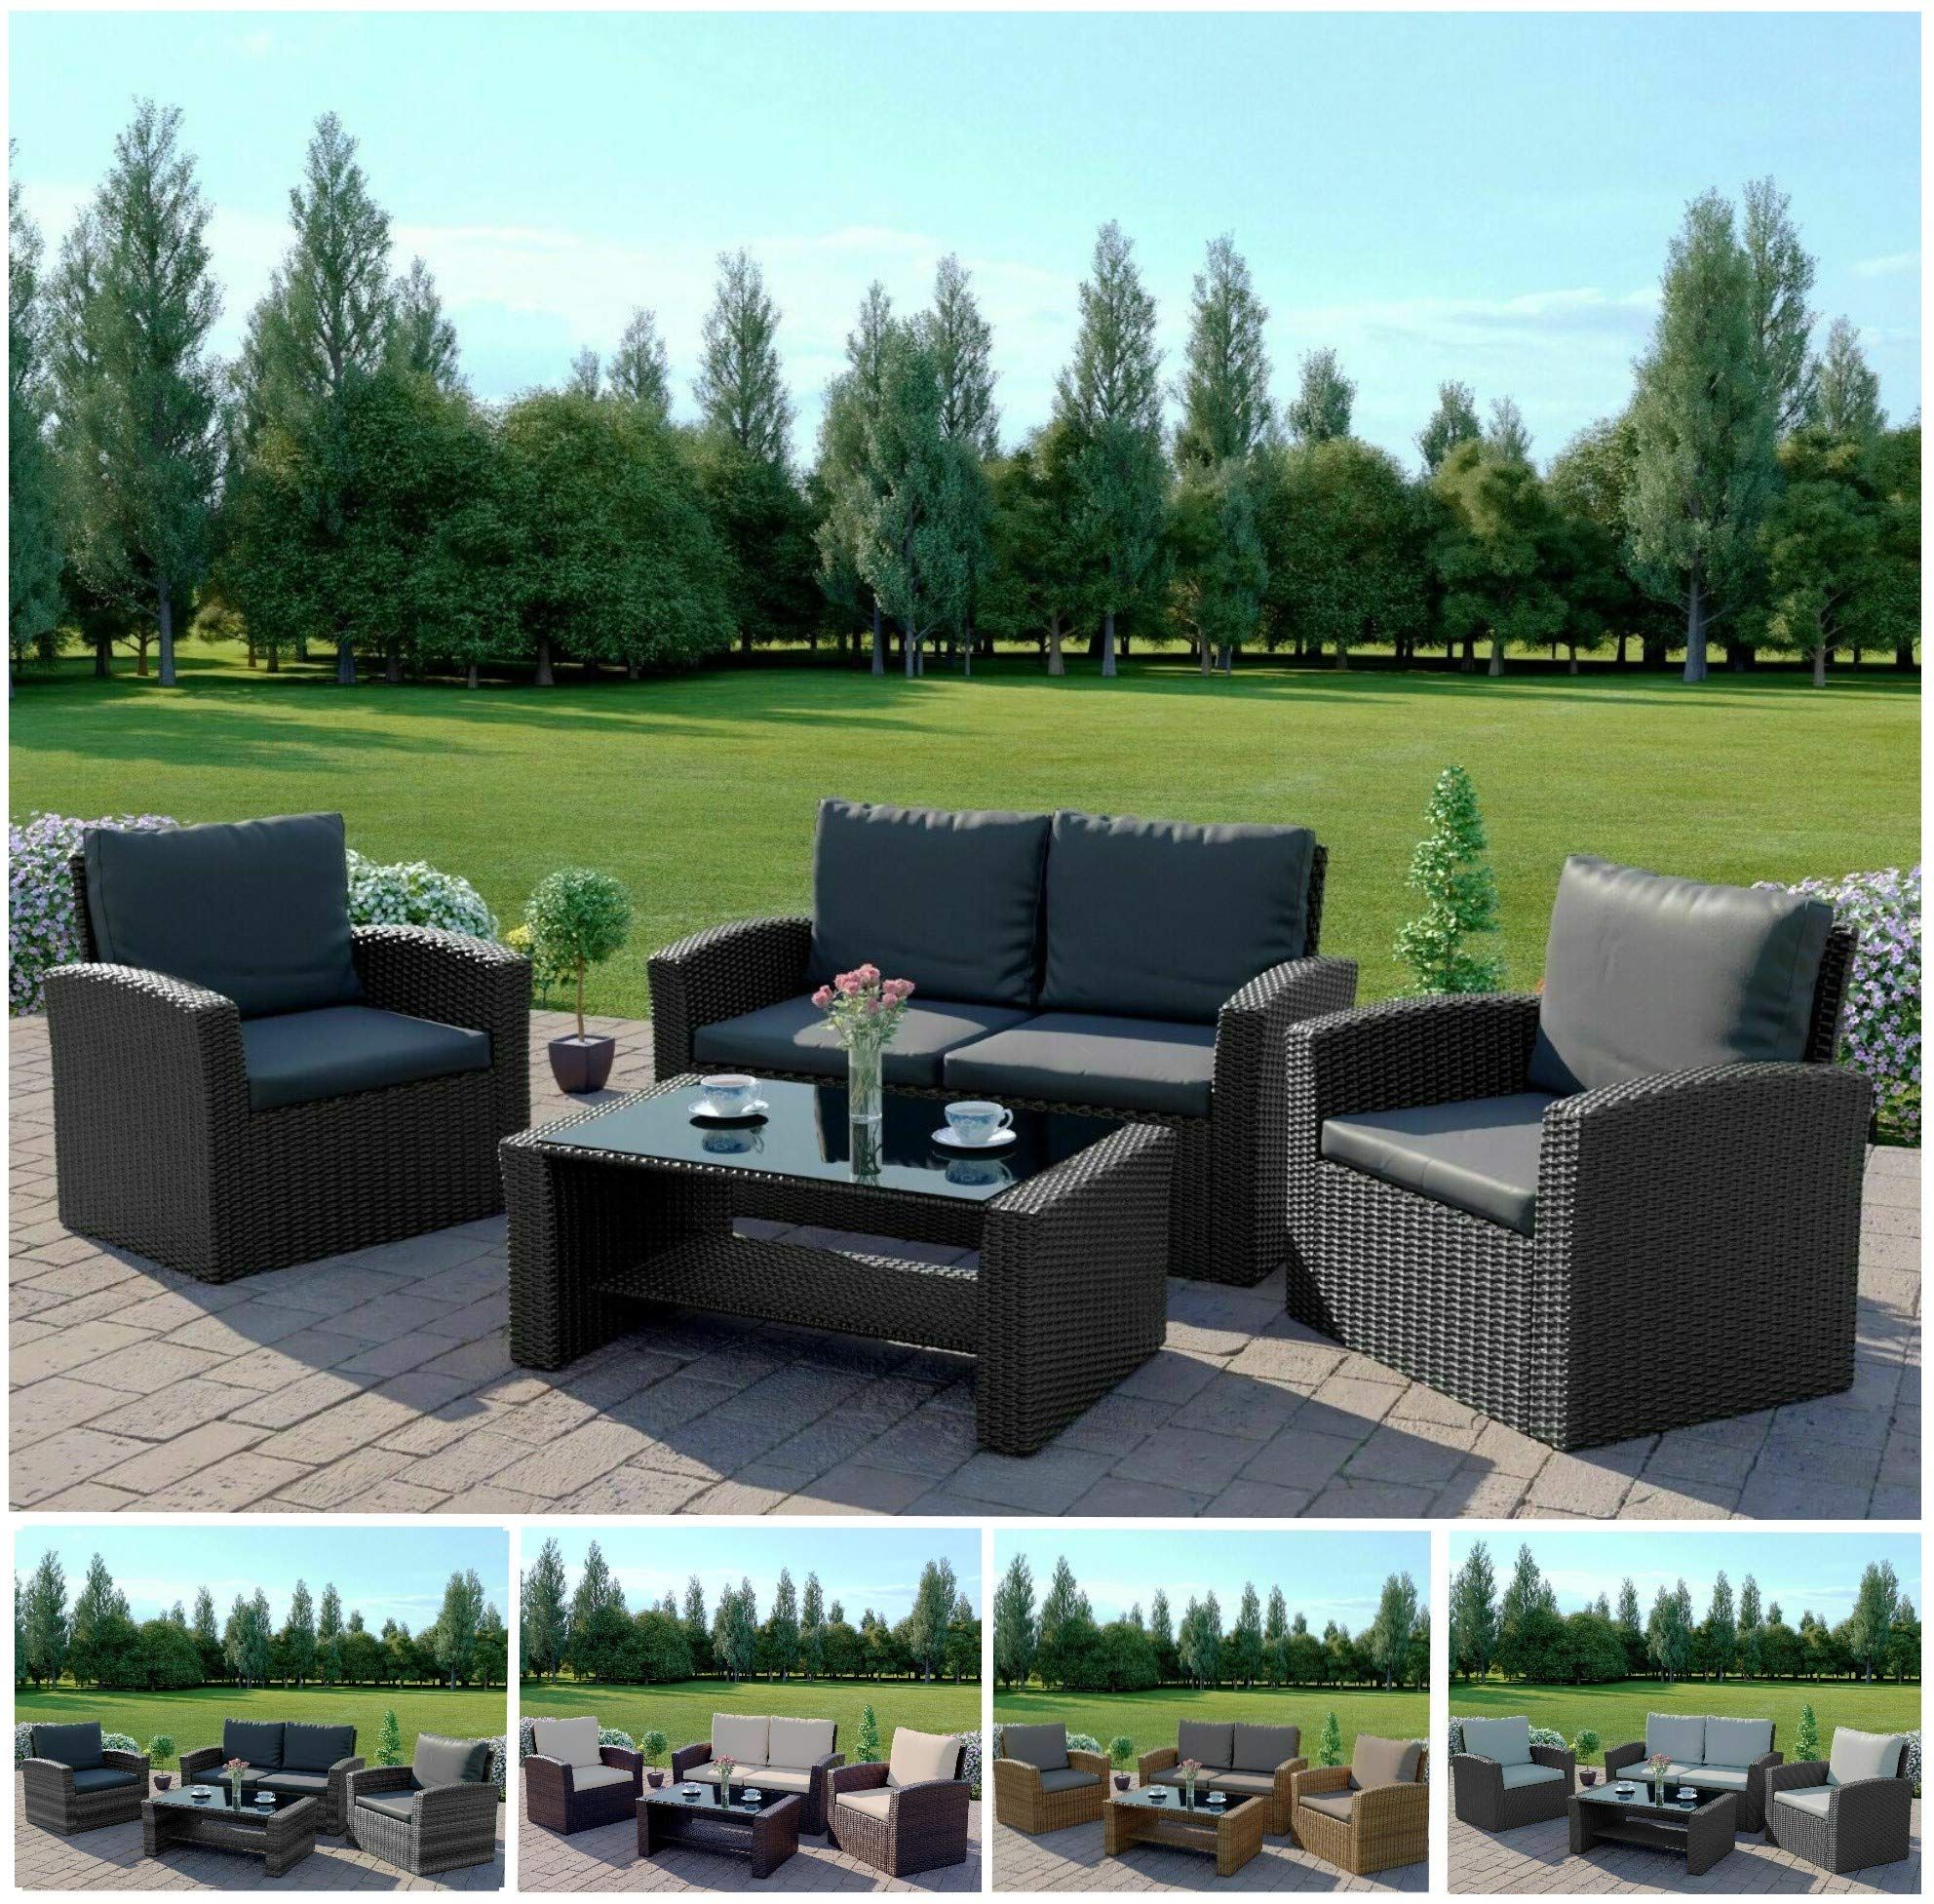 Preferred Black And Gray Outdoor Table And Chair Sets With Regard To Abreo Rattan Outdoor Garden Patio Conservatory 4 Seater Sofa Furniture (View 1 of 15)